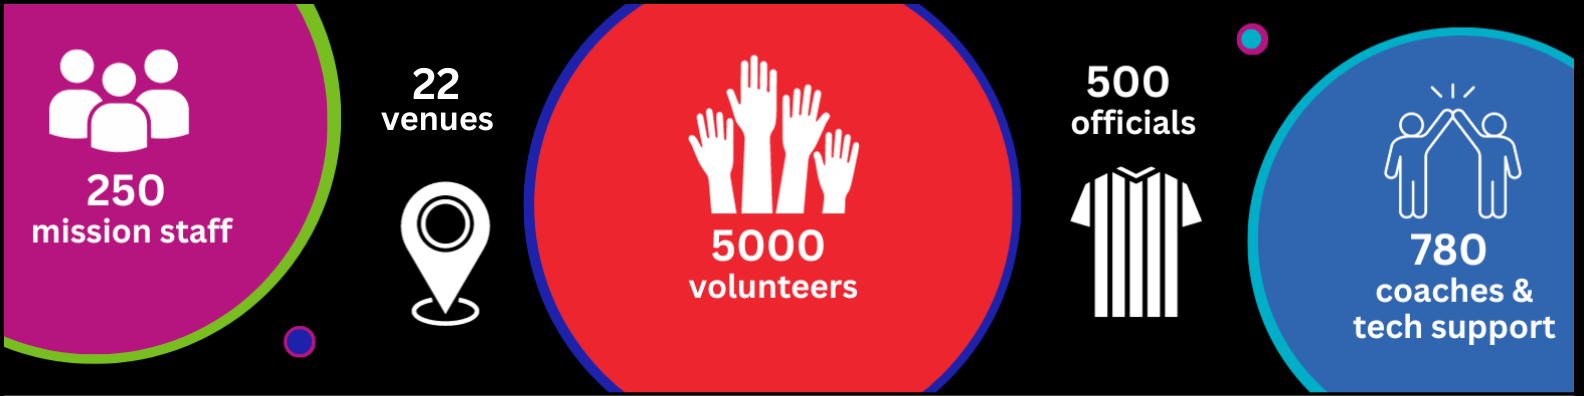 Graphic with statistics: 250 mission staff, 780 coaches / tech support, 5000 volunteers, 500 technical officials, 19 venues